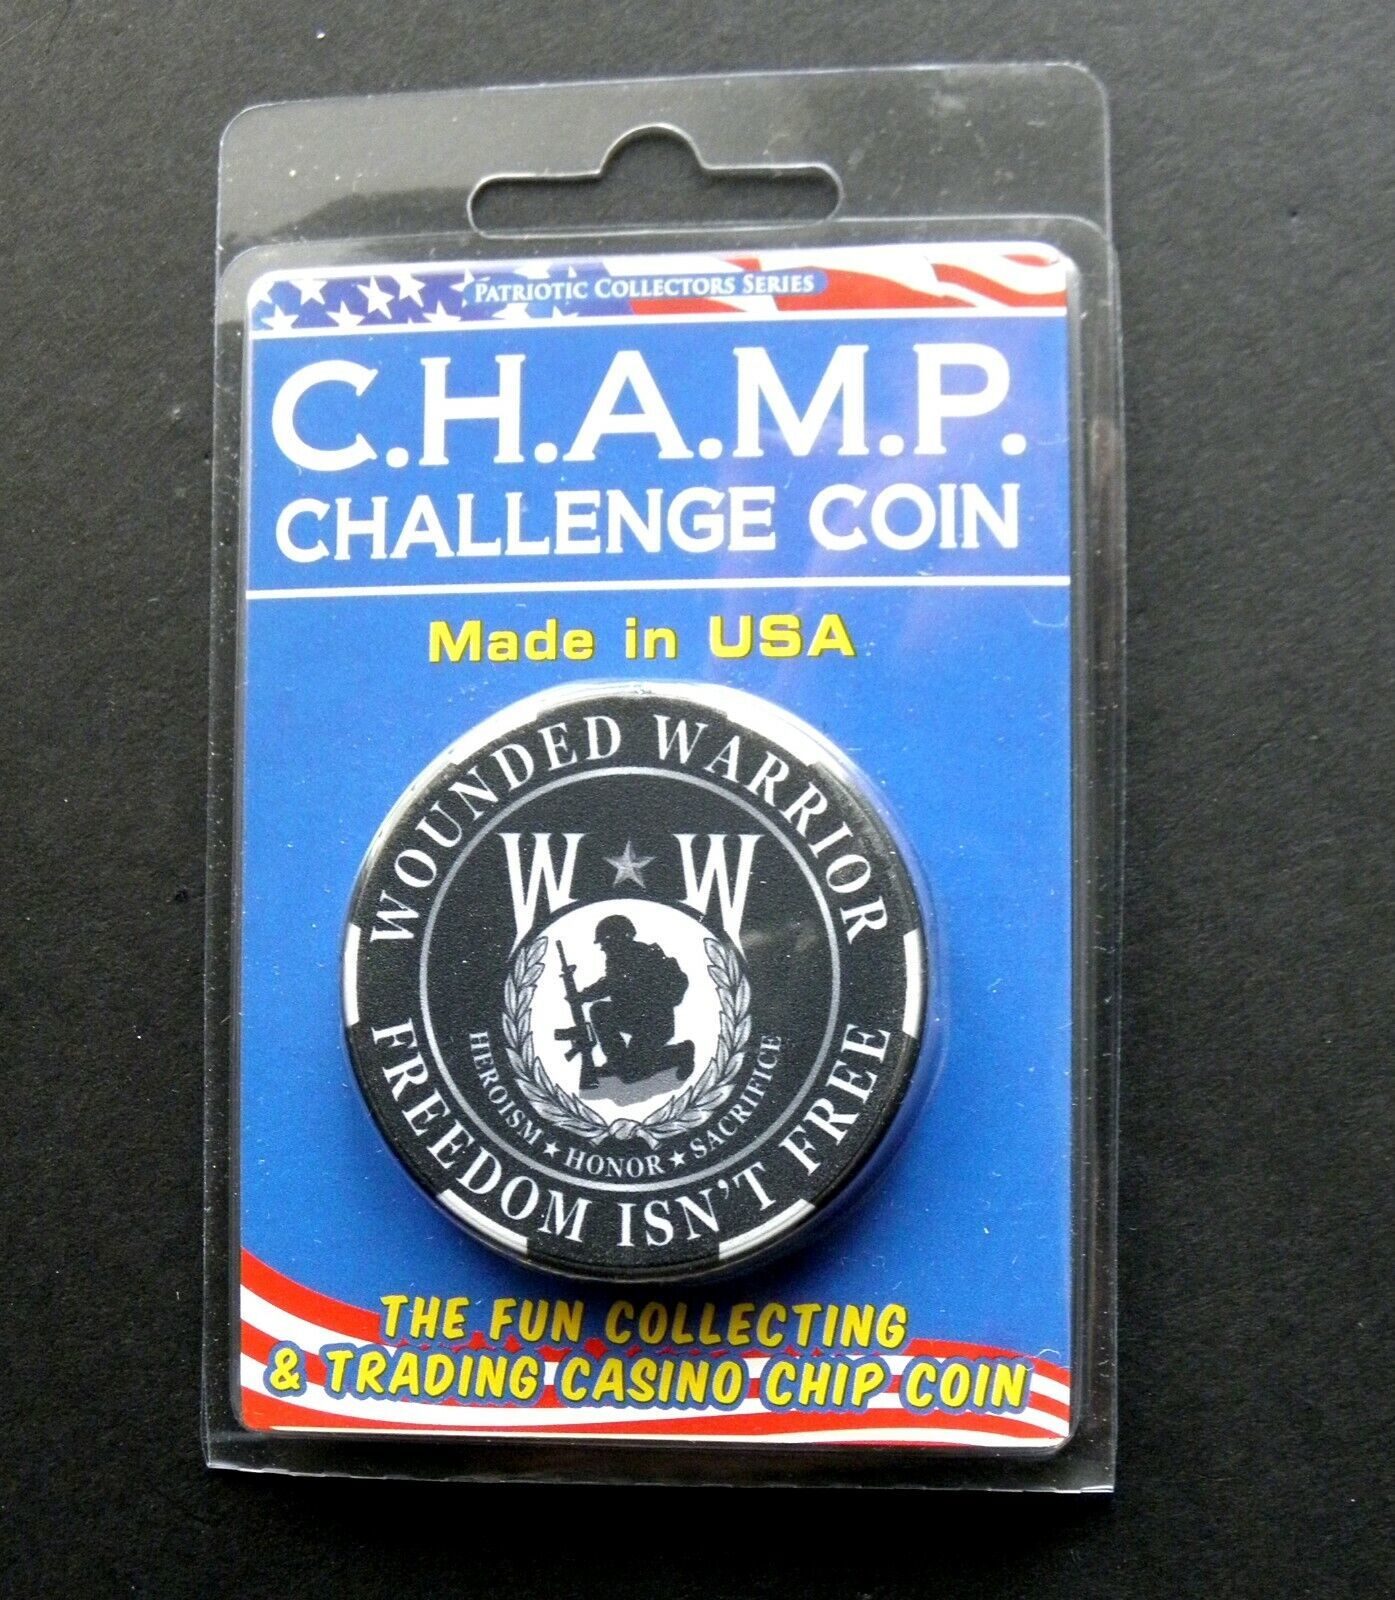 WOUNDED WARRIOR POKER CHIP COIN CHALLENGE COIN 1.75 NEW IN CASE